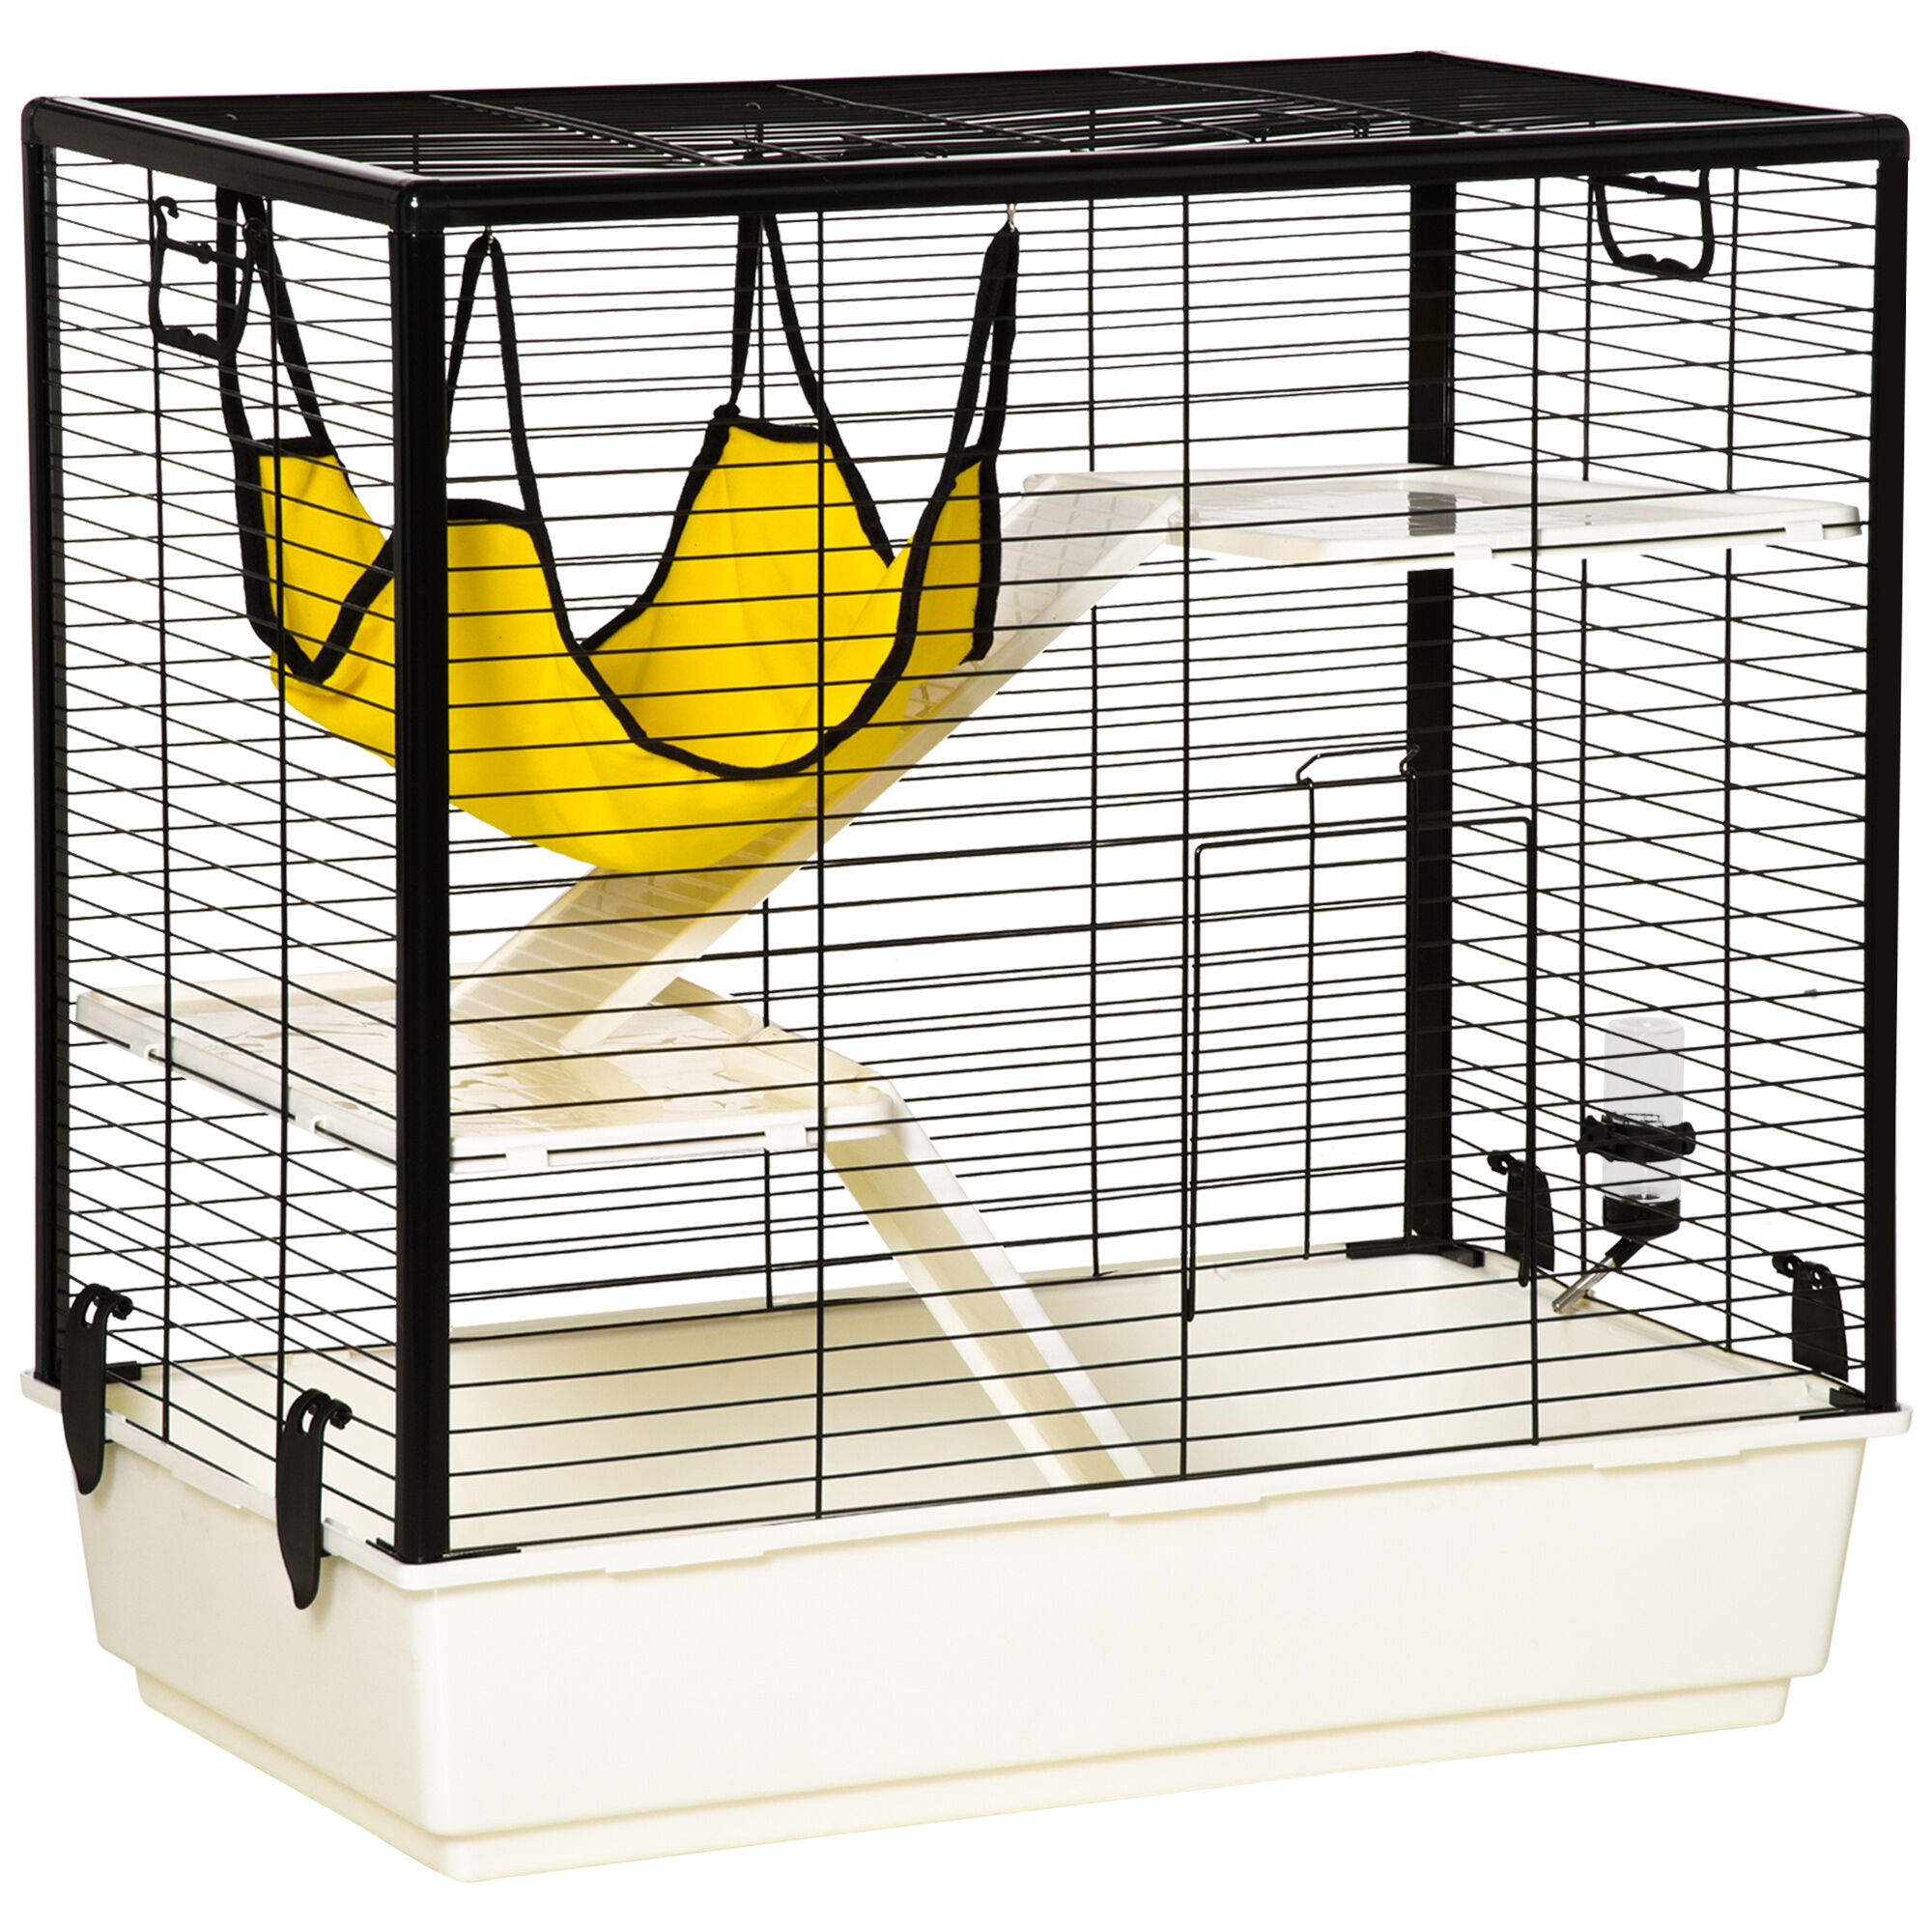 PawHut Small Animal Cage Habitat, Indoor Pet Play House for Guinea Pigs Ferrets, With Hammock Water Bottle Balcony Ramp Food Dish, 31.5"x19", Yellow